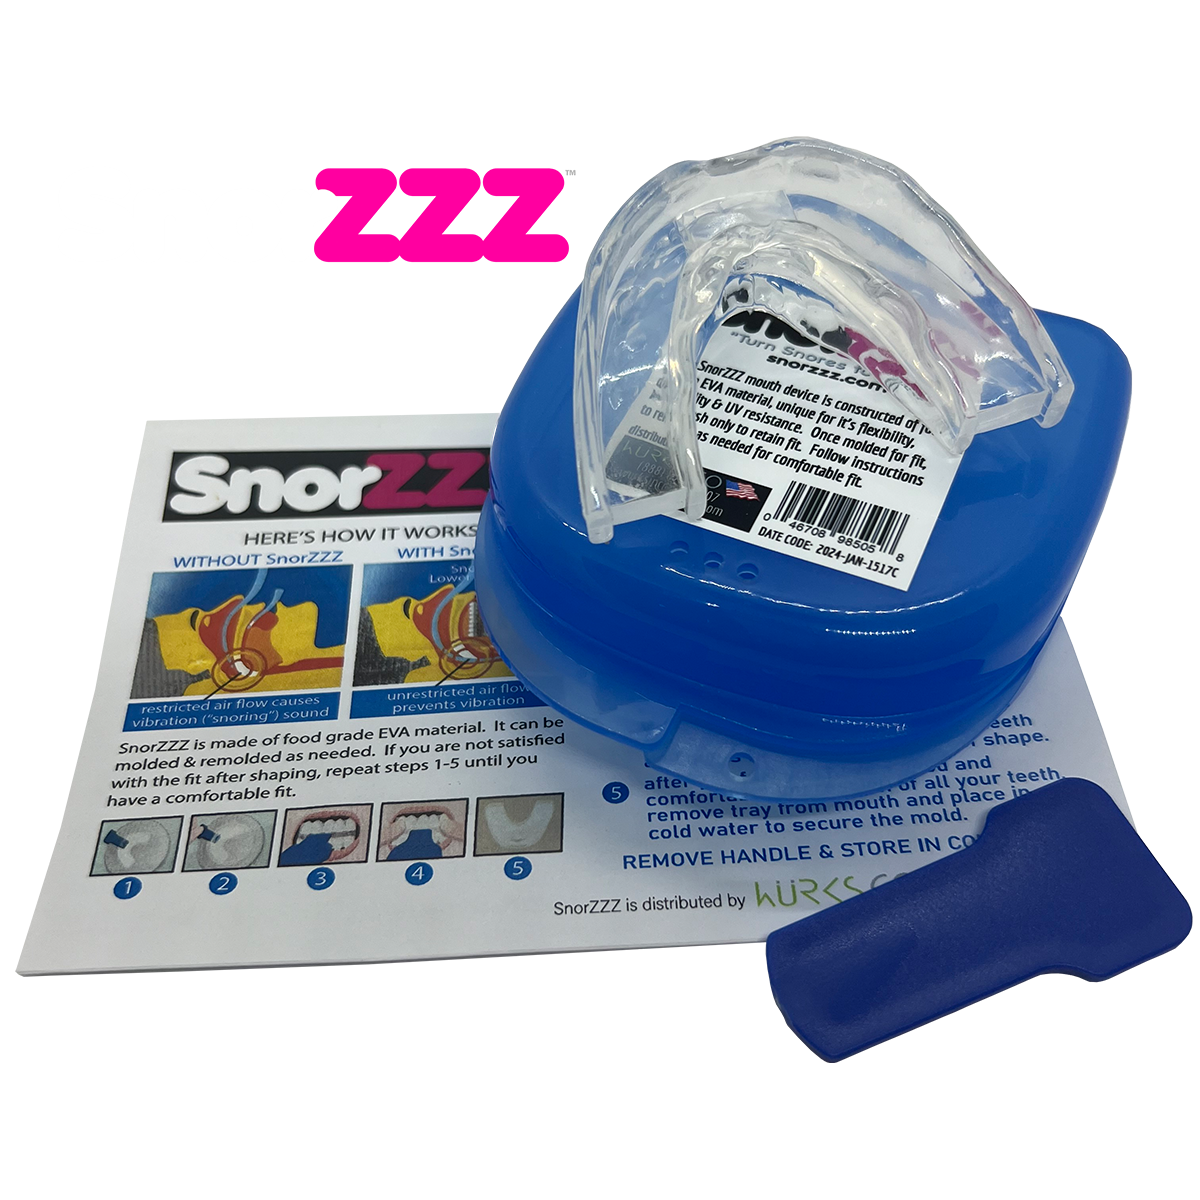 SnorZZZ - 3 Devices for $59.98 = 3 Complete Sets (SAVE 20%) and get FREE Shipping!